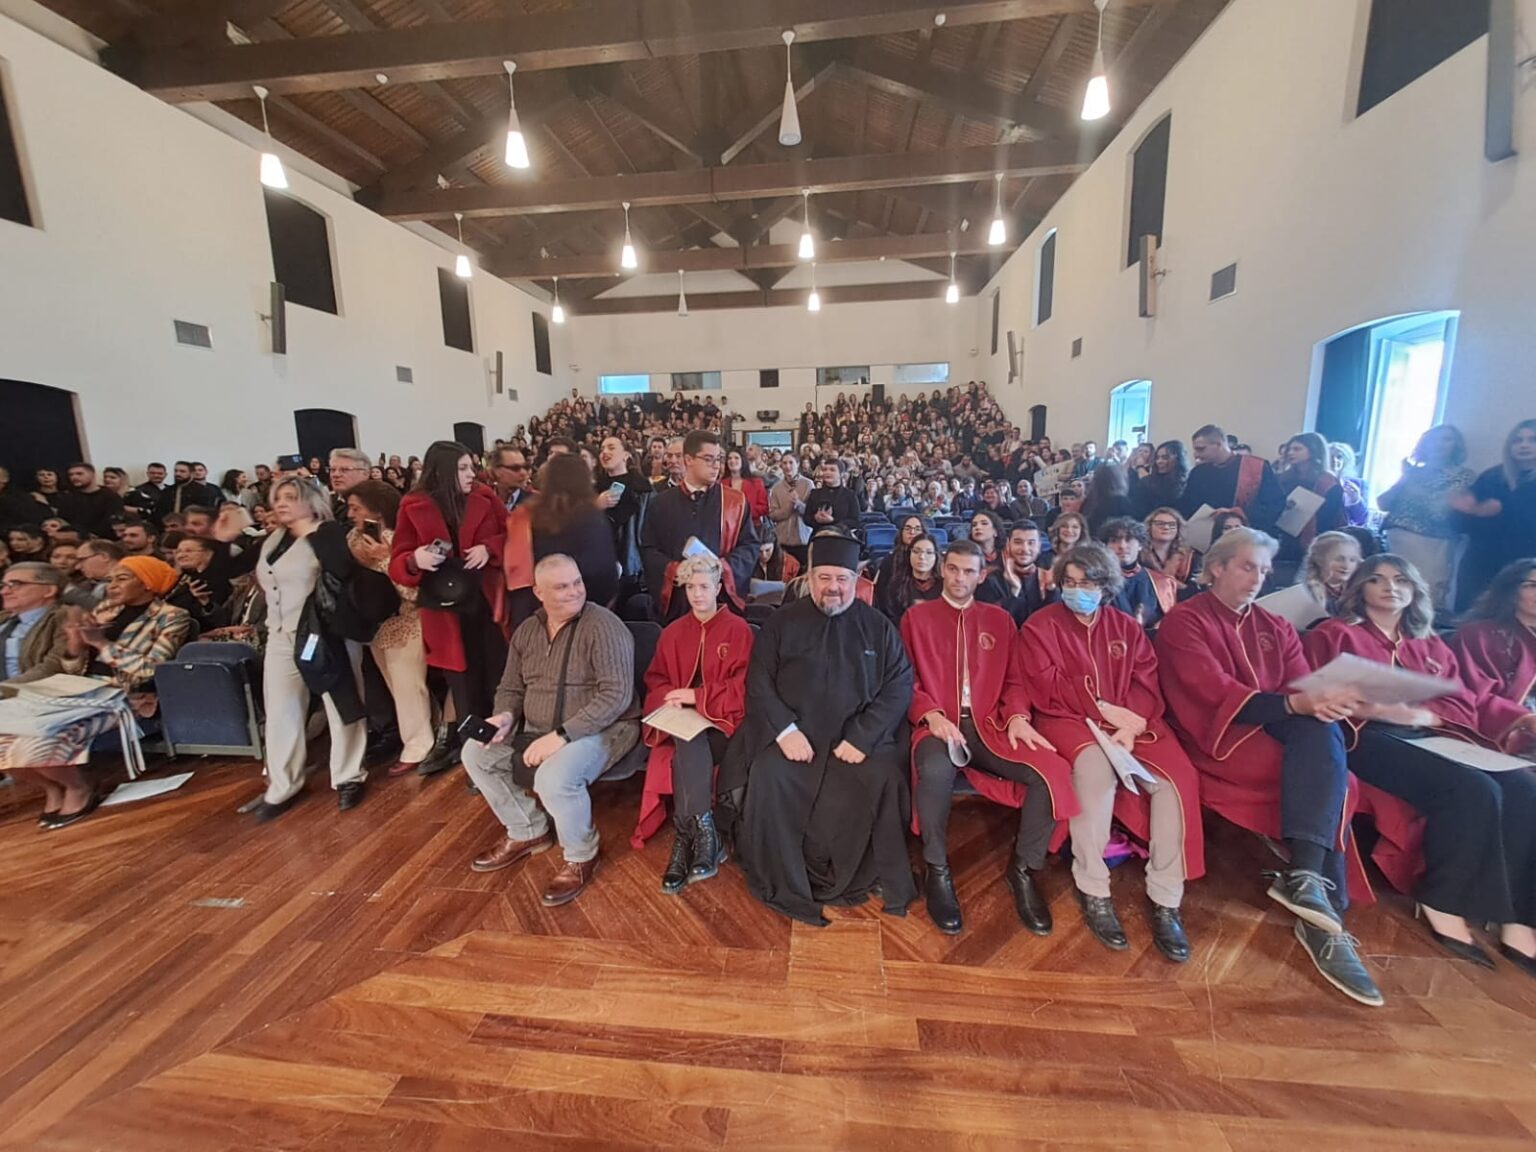 Metropolitan of Zambia was honoured with a Master’s degree from Ionian University, Greece